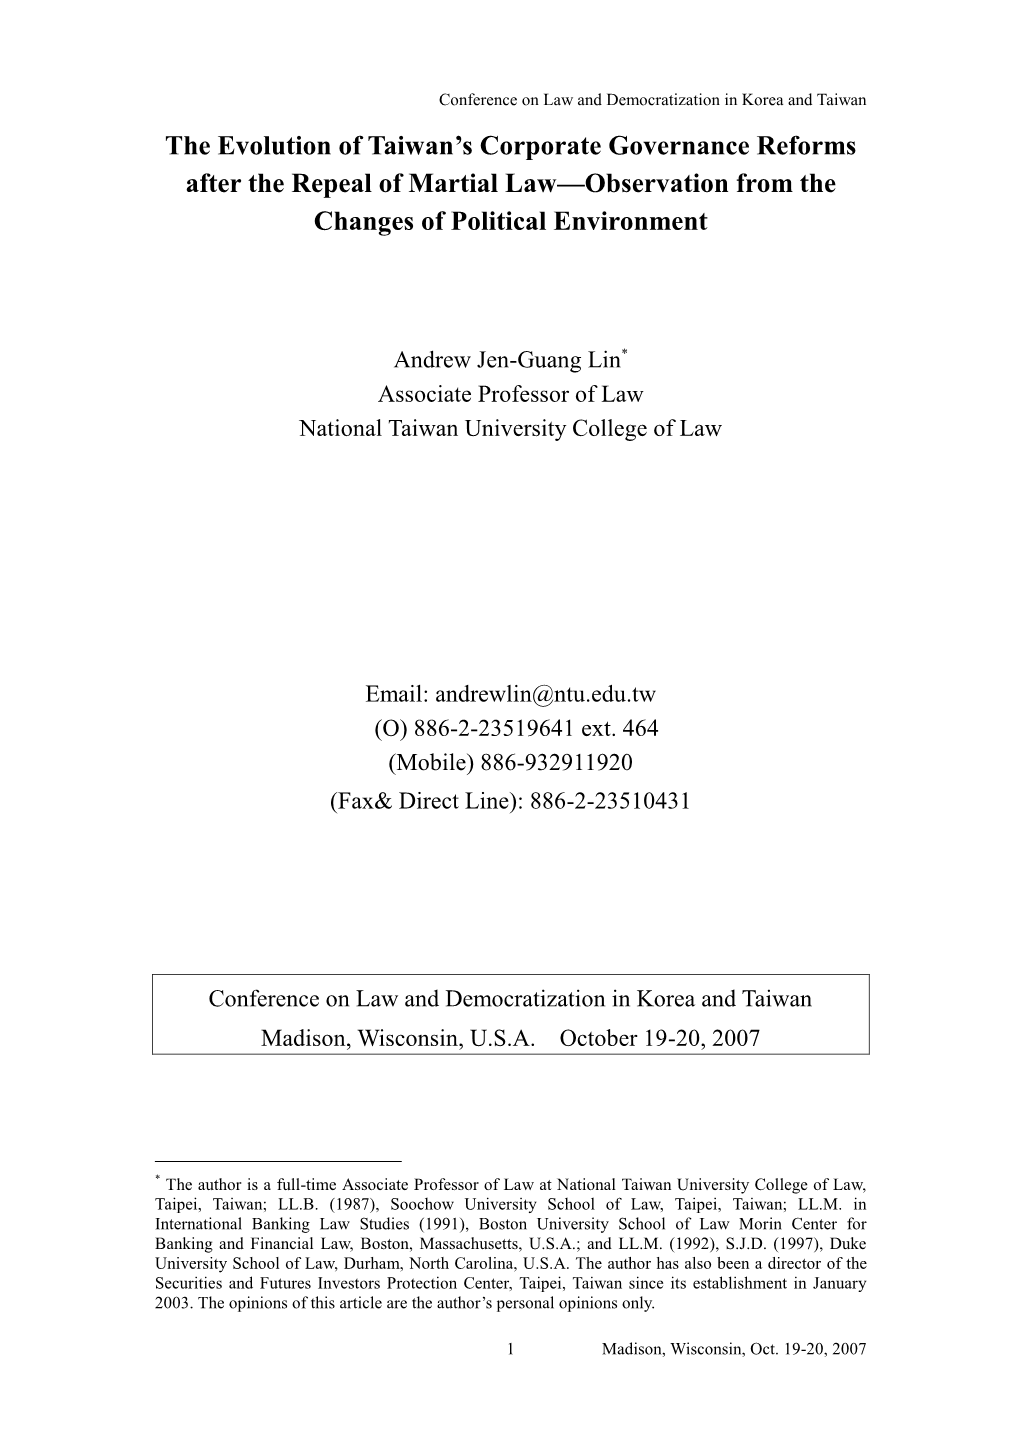 The Evolution of Taiwan's Corporate Governance Reforms After The